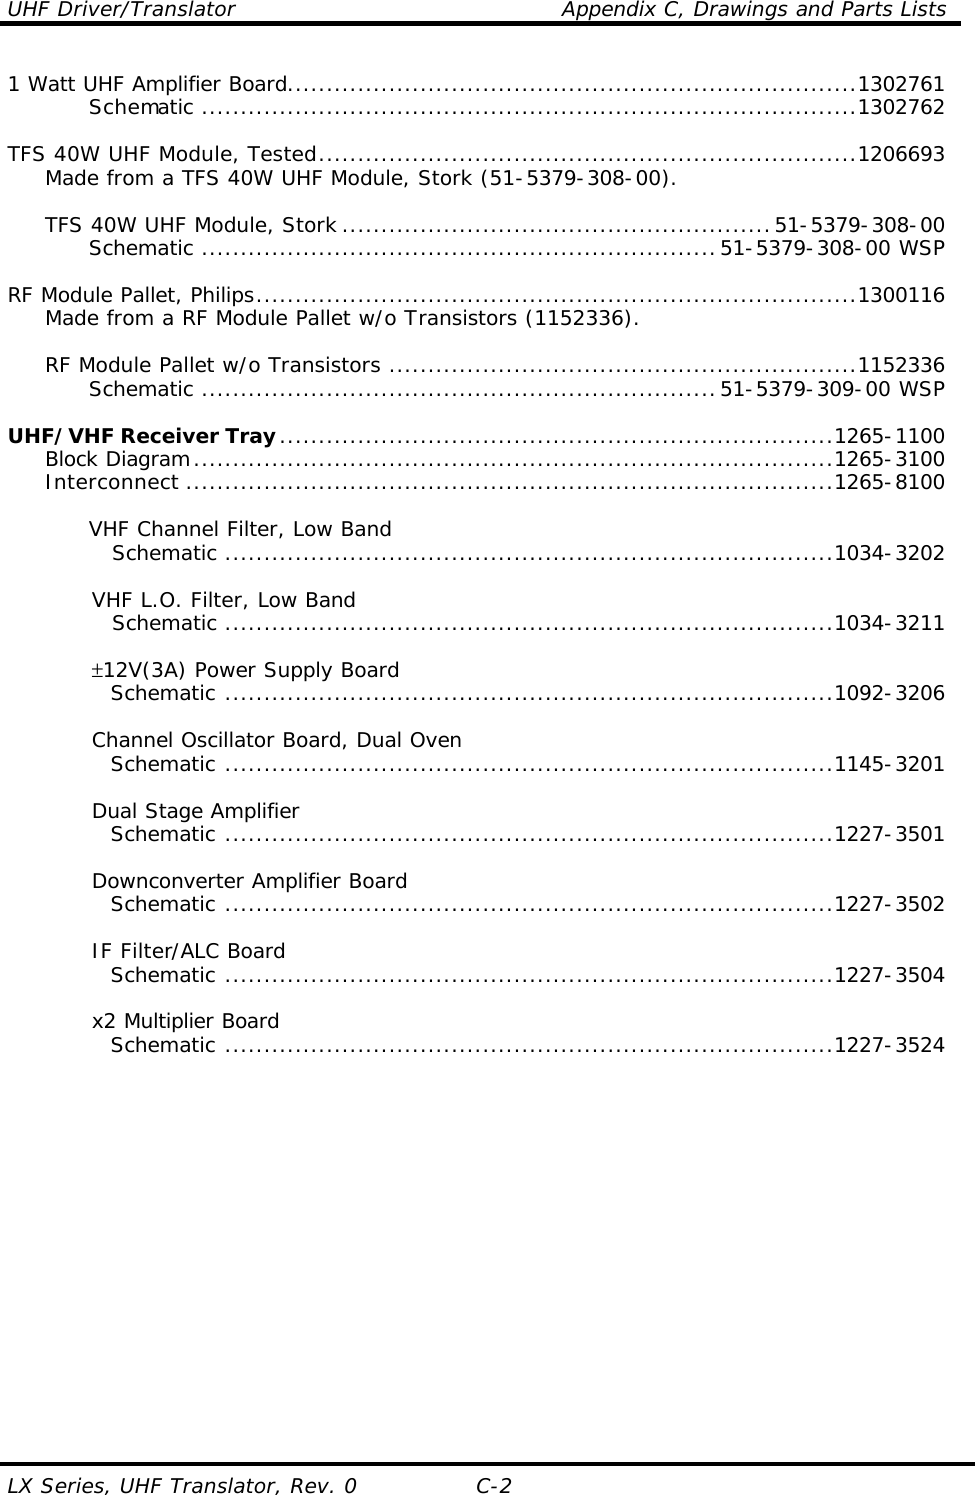 UHF Driver/Translator    Appendix C, Drawings and Parts Lists LX Series, UHF Translator, Rev. 0 C-2 1 Watt UHF Amplifier Board.........................................................................1302761     Schematic ....................................................................................1302762      TFS 40W UHF Module, Tested.....................................................................1206693  Made from a TFS 40W UHF Module, Stork (51-5379-308-00).       TFS 40W UHF Module, Stork .......................................................51-5379-308-00     Schematic ..................................................................51-5379-308-00 WSP      RF Module Pallet, Philips.............................................................................1300116  Made from a RF Module Pallet w/o Transistors (1152336).       RF Module Pallet w/o Transistors ............................................................1152336     Schematic ..................................................................51-5379-309-00 WSP      UHF/VHF Receiver Tray.......................................................................1265-1100  Block Diagram..................................................................................1265-3100  Interconnect ...................................................................................1265-8100      VHF Channel Filter, Low Band       Schematic ..............................................................................1034-3202   VHF L.O. Filter, Low Band       Schematic ..............................................................................1034-3211     ±12V(3A) Power Supply Board     Schematic ..............................................................................1092-3206   Channel Oscillator Board, Dual Oven     Schematic ..............................................................................1145-3201   Dual Stage Amplifier     Schematic ..............................................................................1227-3501   Downconverter Amplifier Board     Schematic ..............................................................................1227-3502     IF Filter/ALC Board     Schematic ..............................................................................1227-3504     x2 Multiplier Board     Schematic ..............................................................................1227-3524    